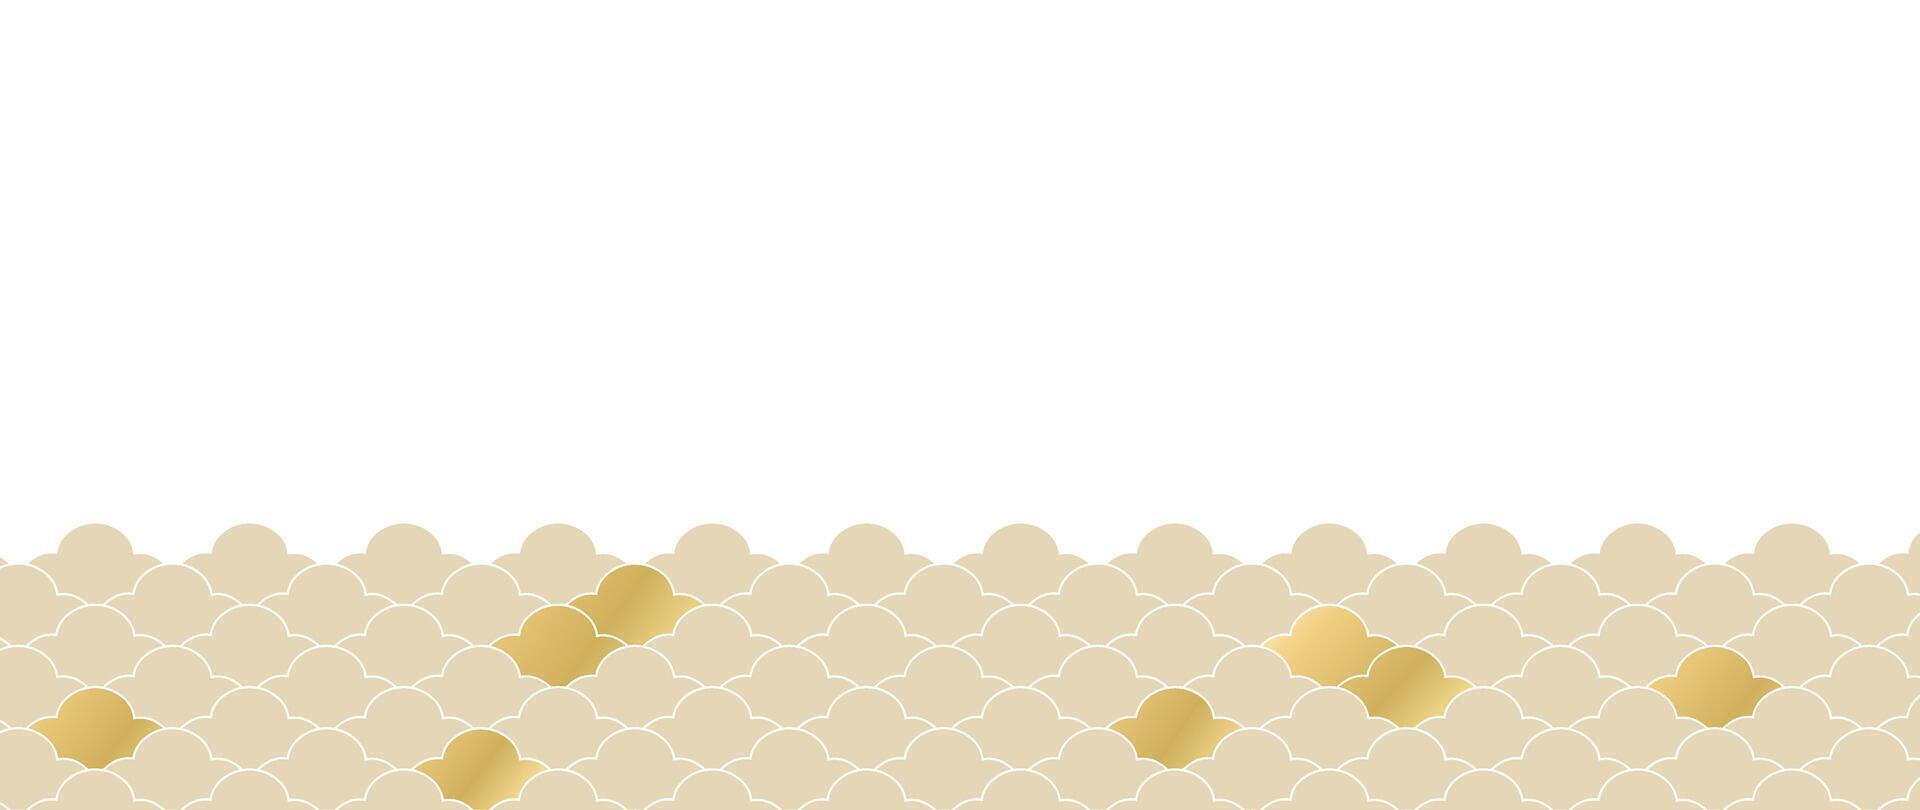 Japanese gold wave background vector. Wallpaper design with gold and white ocean wave pattern backdrop. Modern luxury oriental illustration for cover, banner, website, decor, border. vector